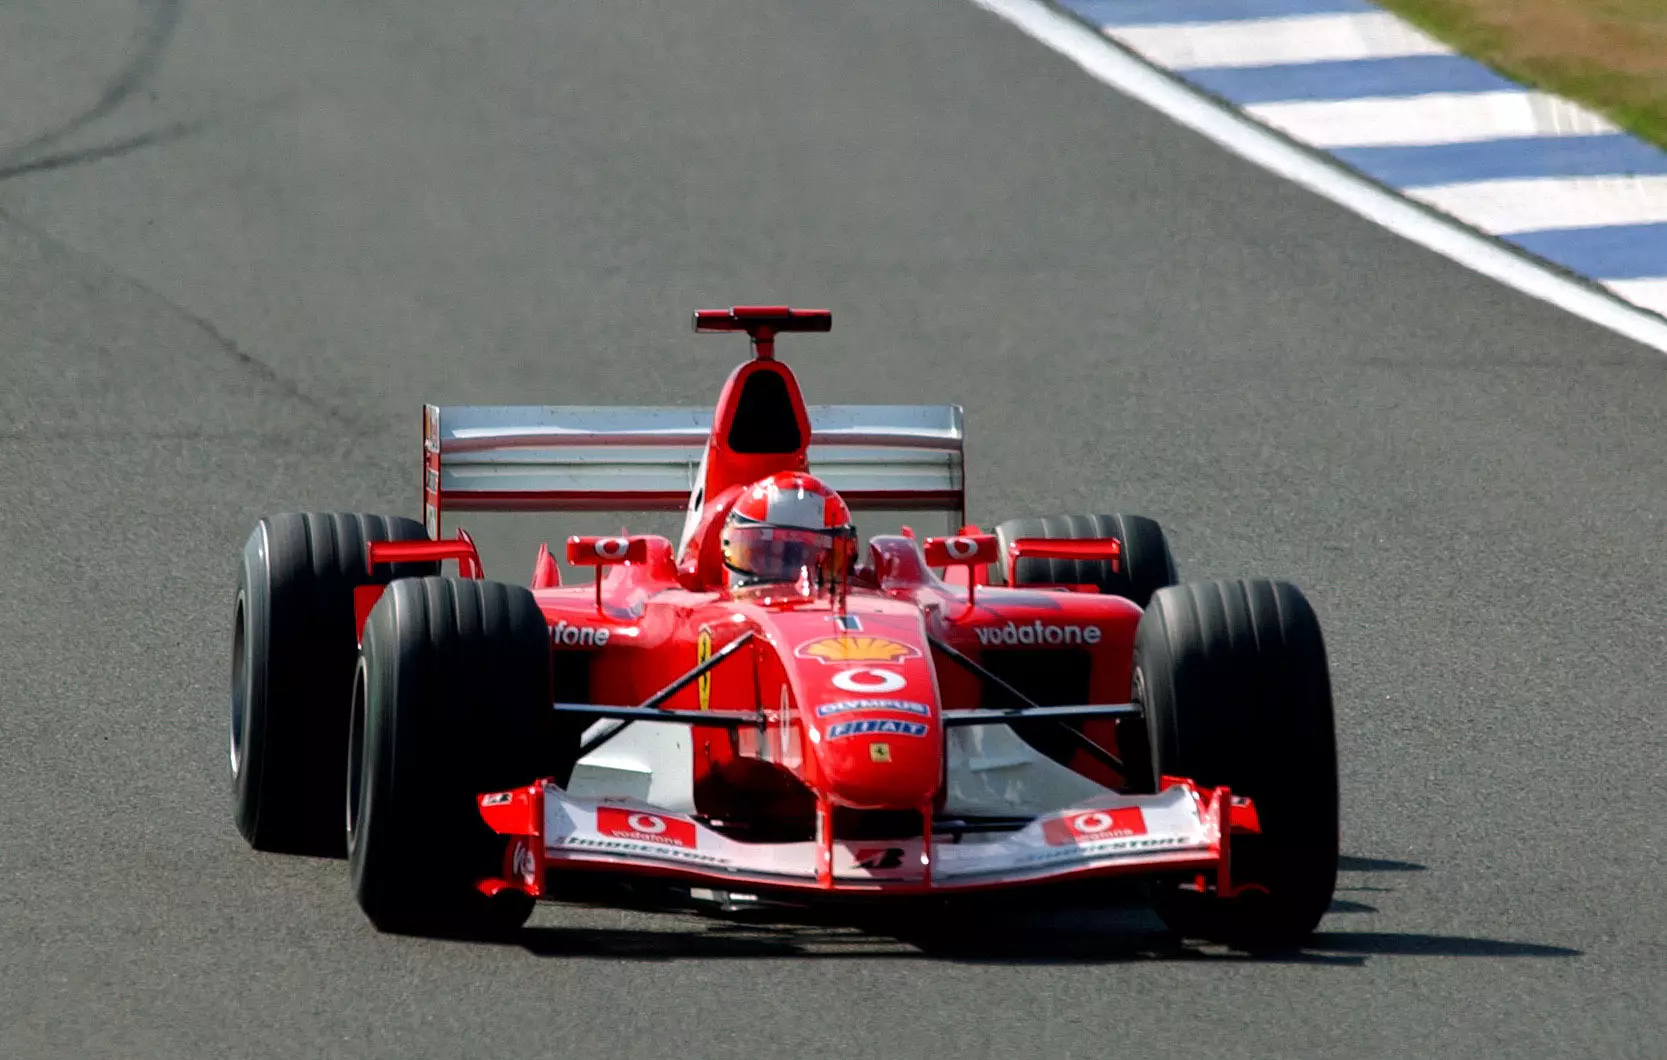 Between 2000 and 2004 he won five championships while driving for Ferrari.